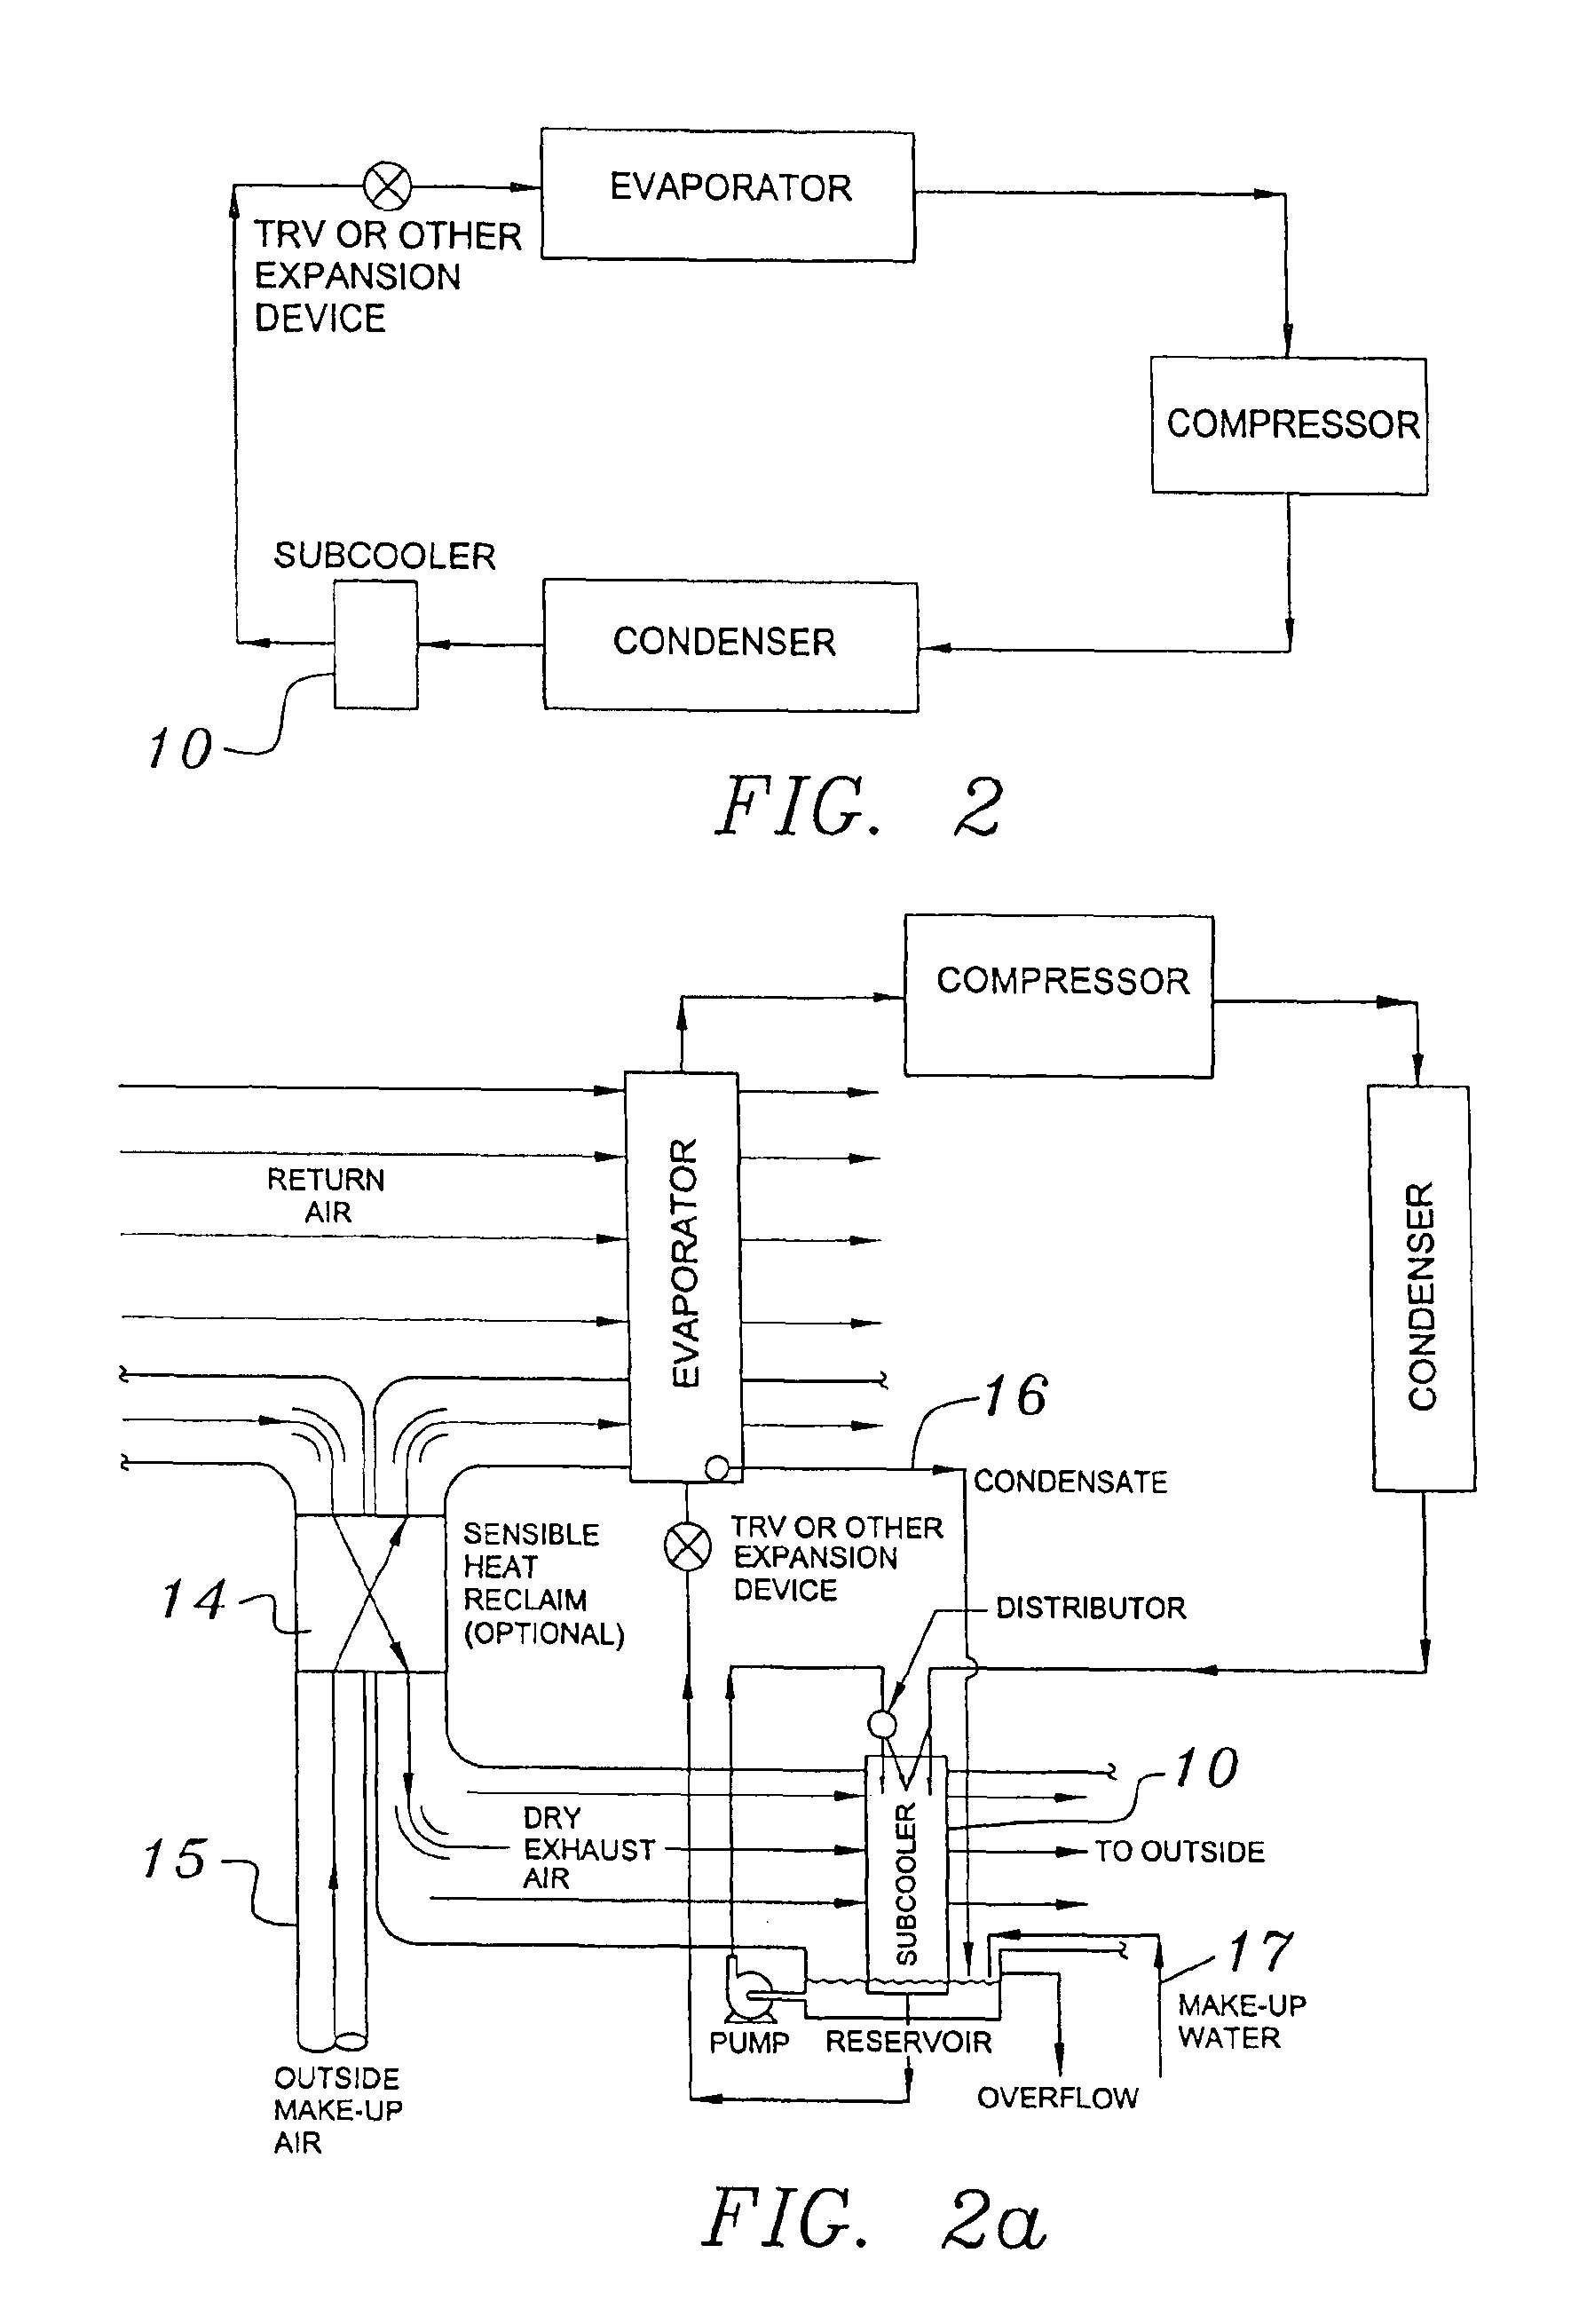 Building exhaust and air conditioner condensate (and/or other water source) evaporative refrigerant subcool/precool system and method therefor